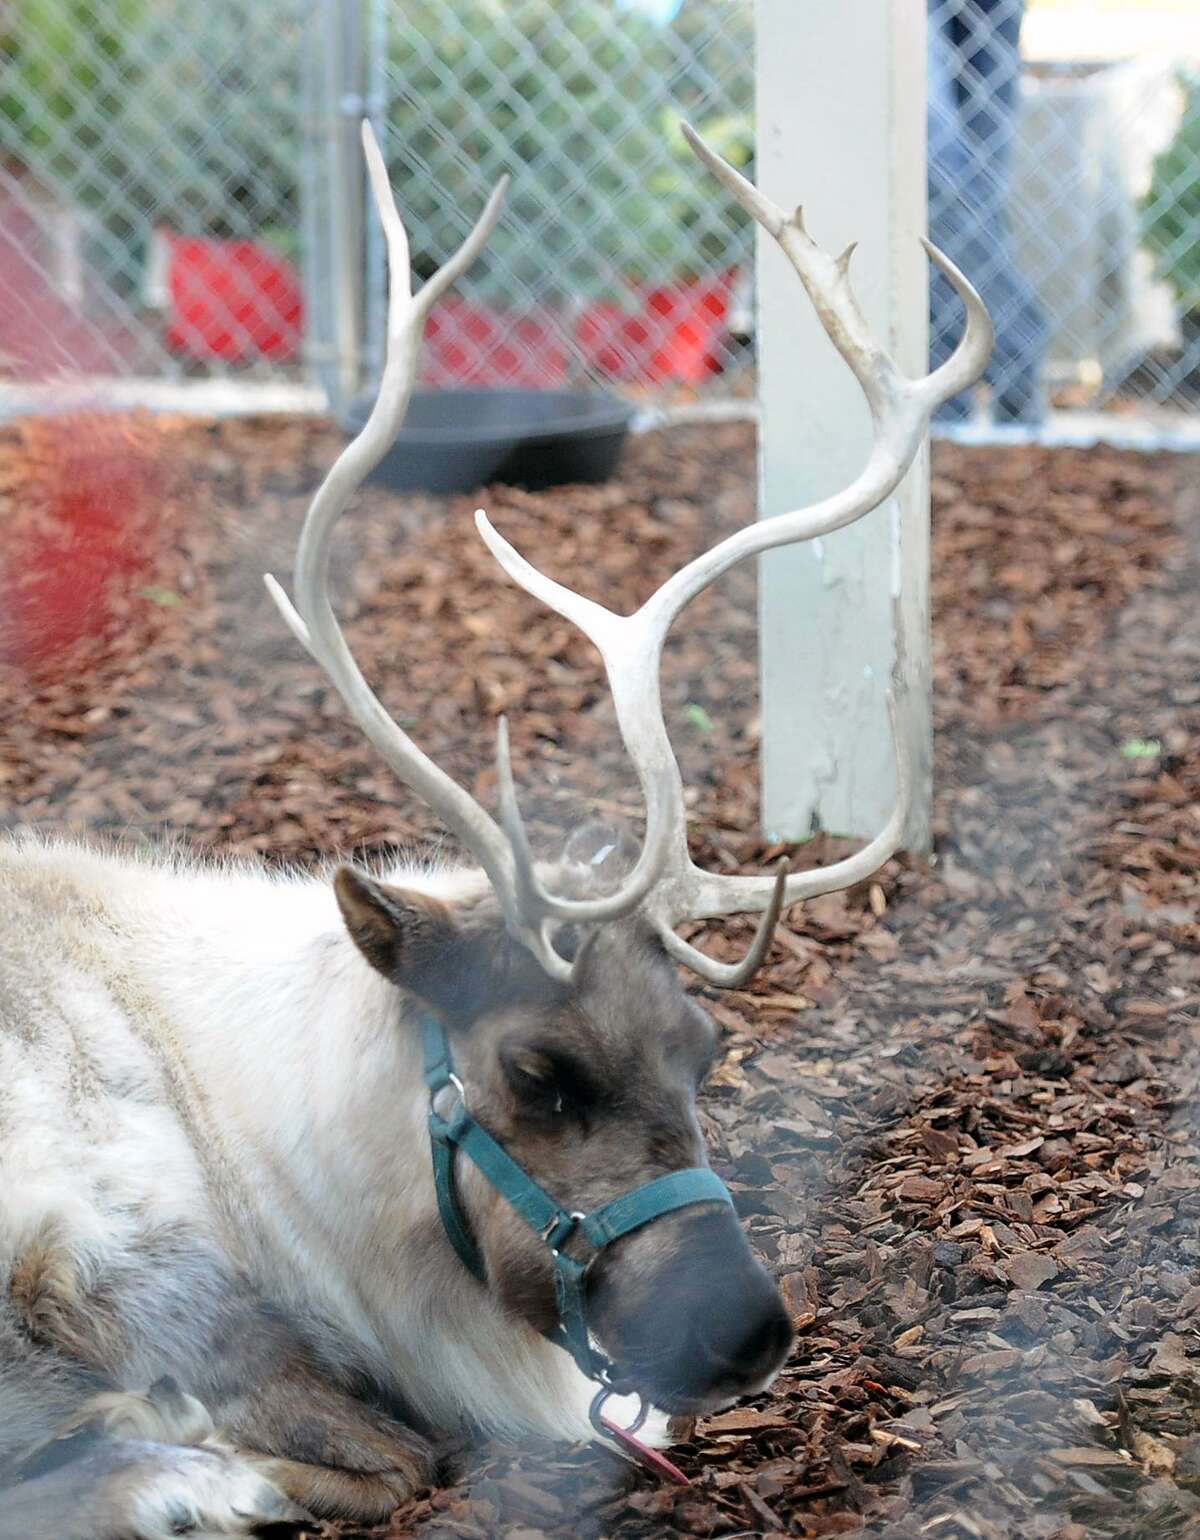 The Greenwich Reindeer Festival featuring live reindeer and Santa's Workshop is returning to Greenwich on Nov. 25 but it will be at Sam Bridge Nursery for the first time.